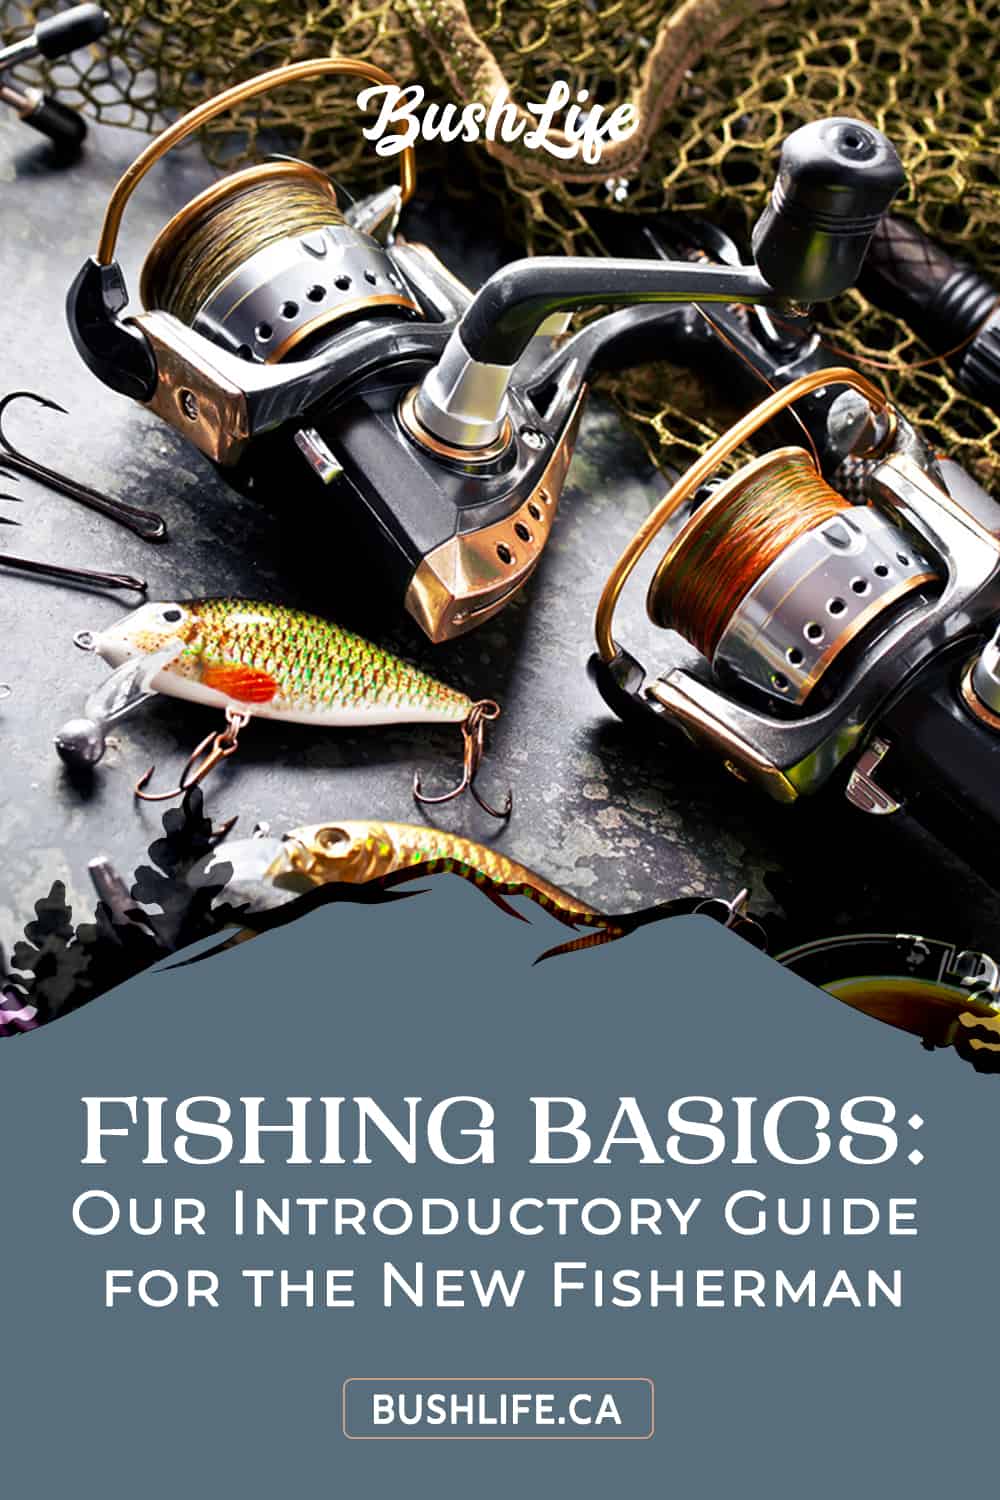 Fishing Basics: Our Introductory Guide for the New Fisherman